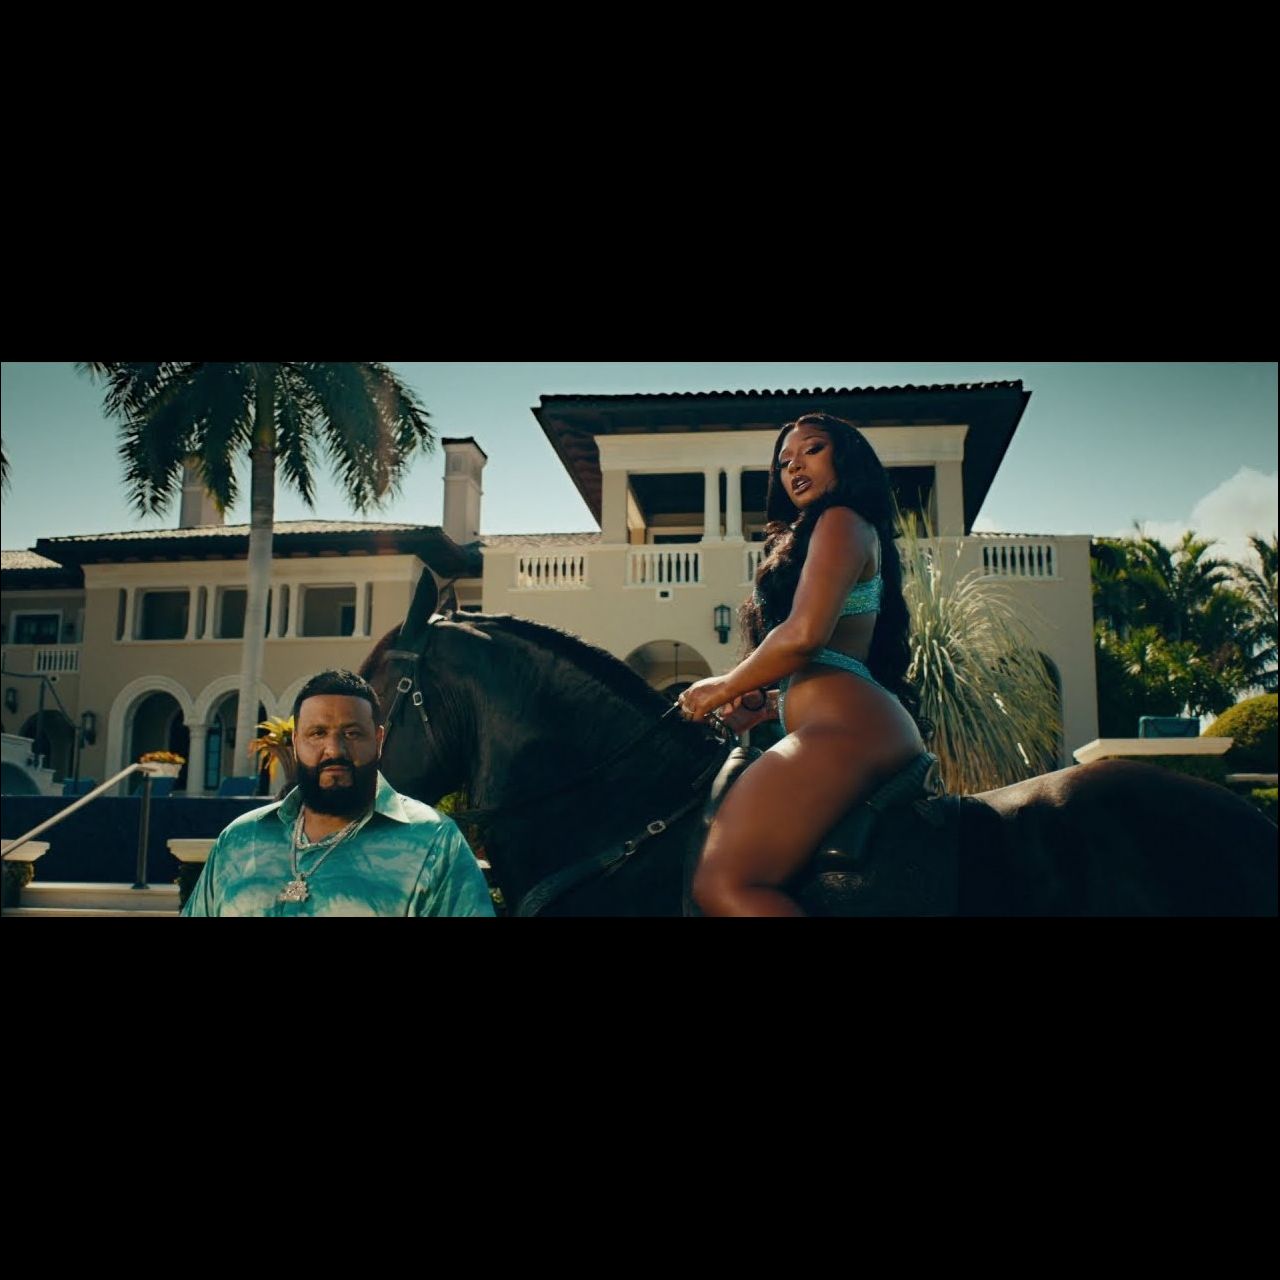 DJ Khaled - I Did It (ft. Post Malone, Megan Thee Stallion, Lil Baby and DaBaby) (Thumbnail)